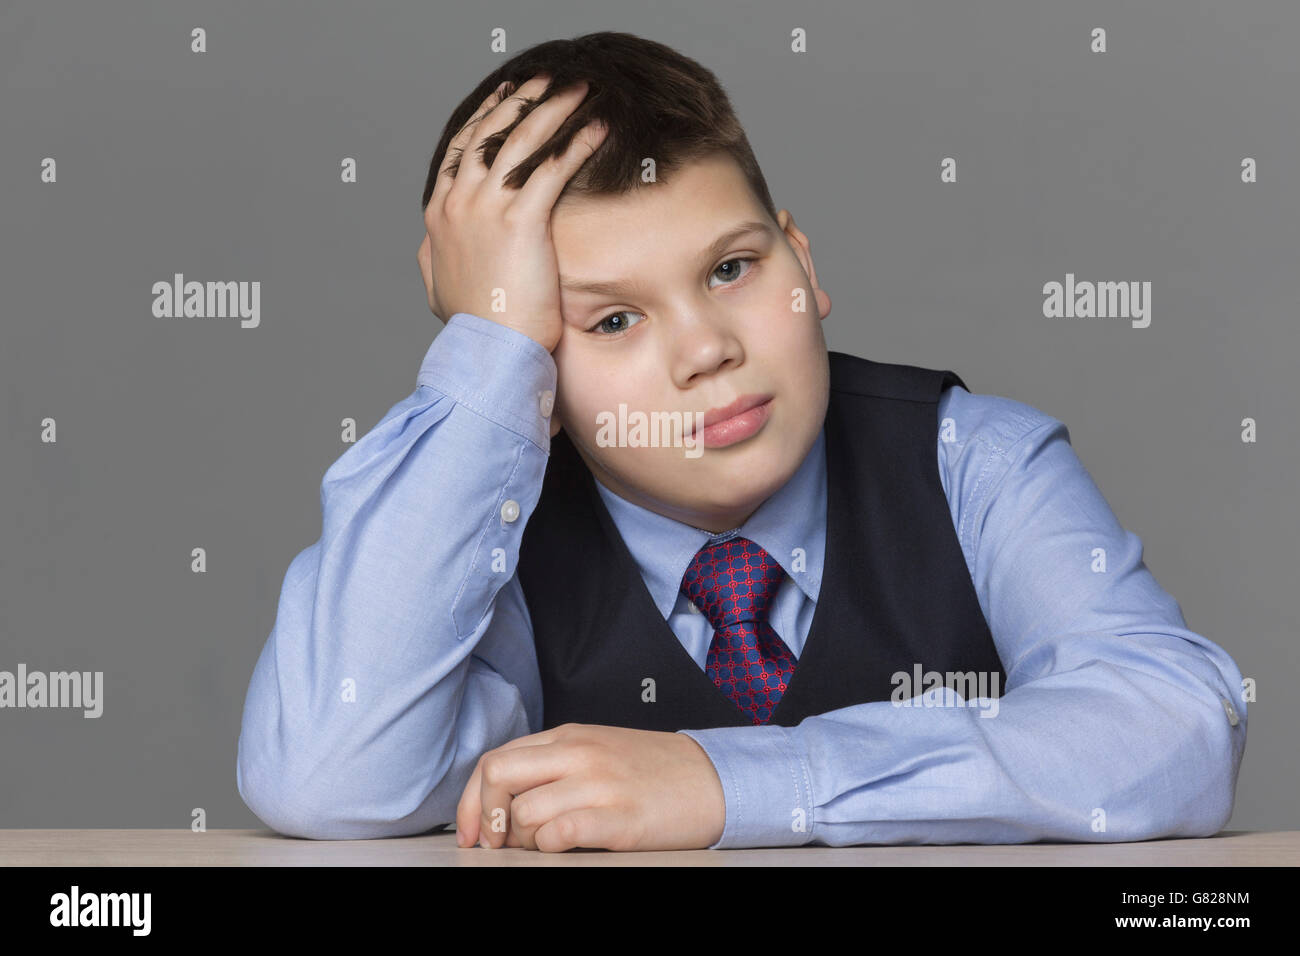 Portrait of boy with head in hand against gray background Stock Photo